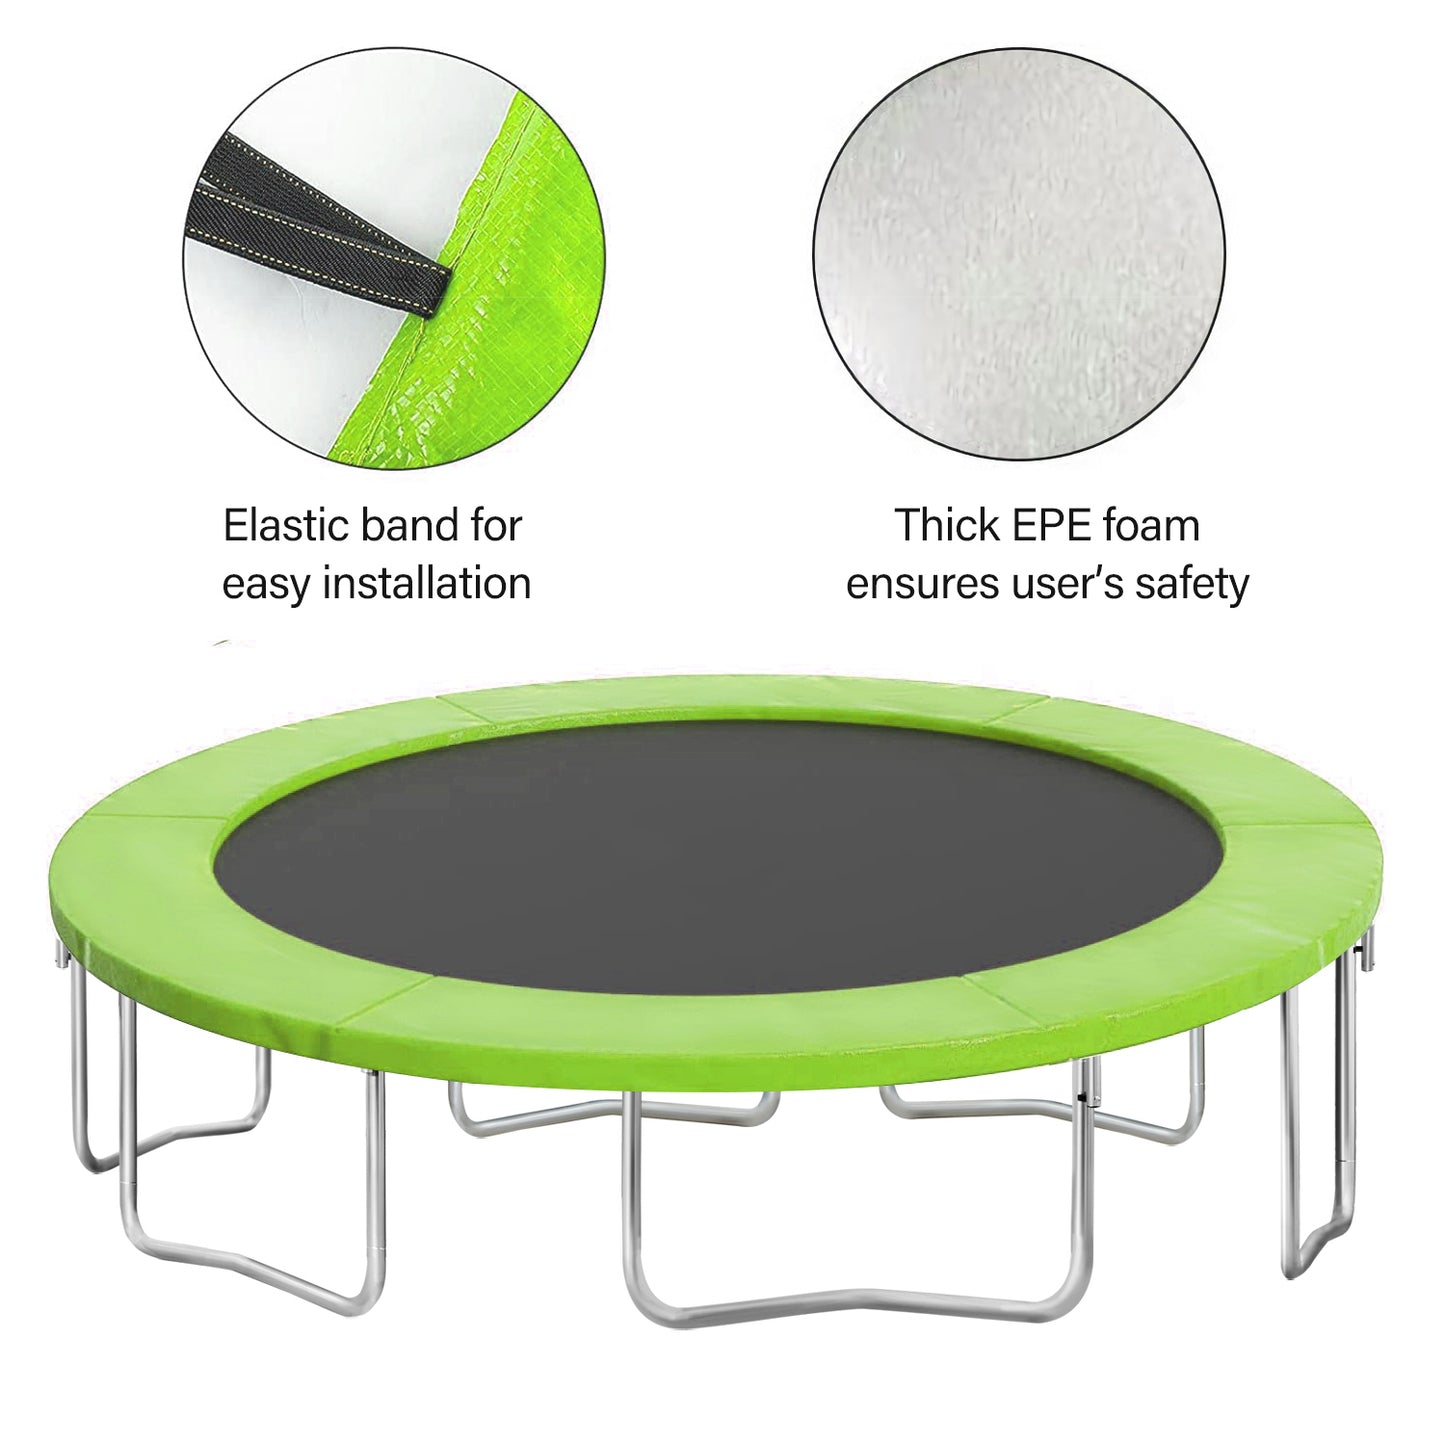 Trampoline Safety Pad for 15ft trampoline - Replacement Spring Cover Pad, No Holes for Poles, Waterproof&UV-Resistant